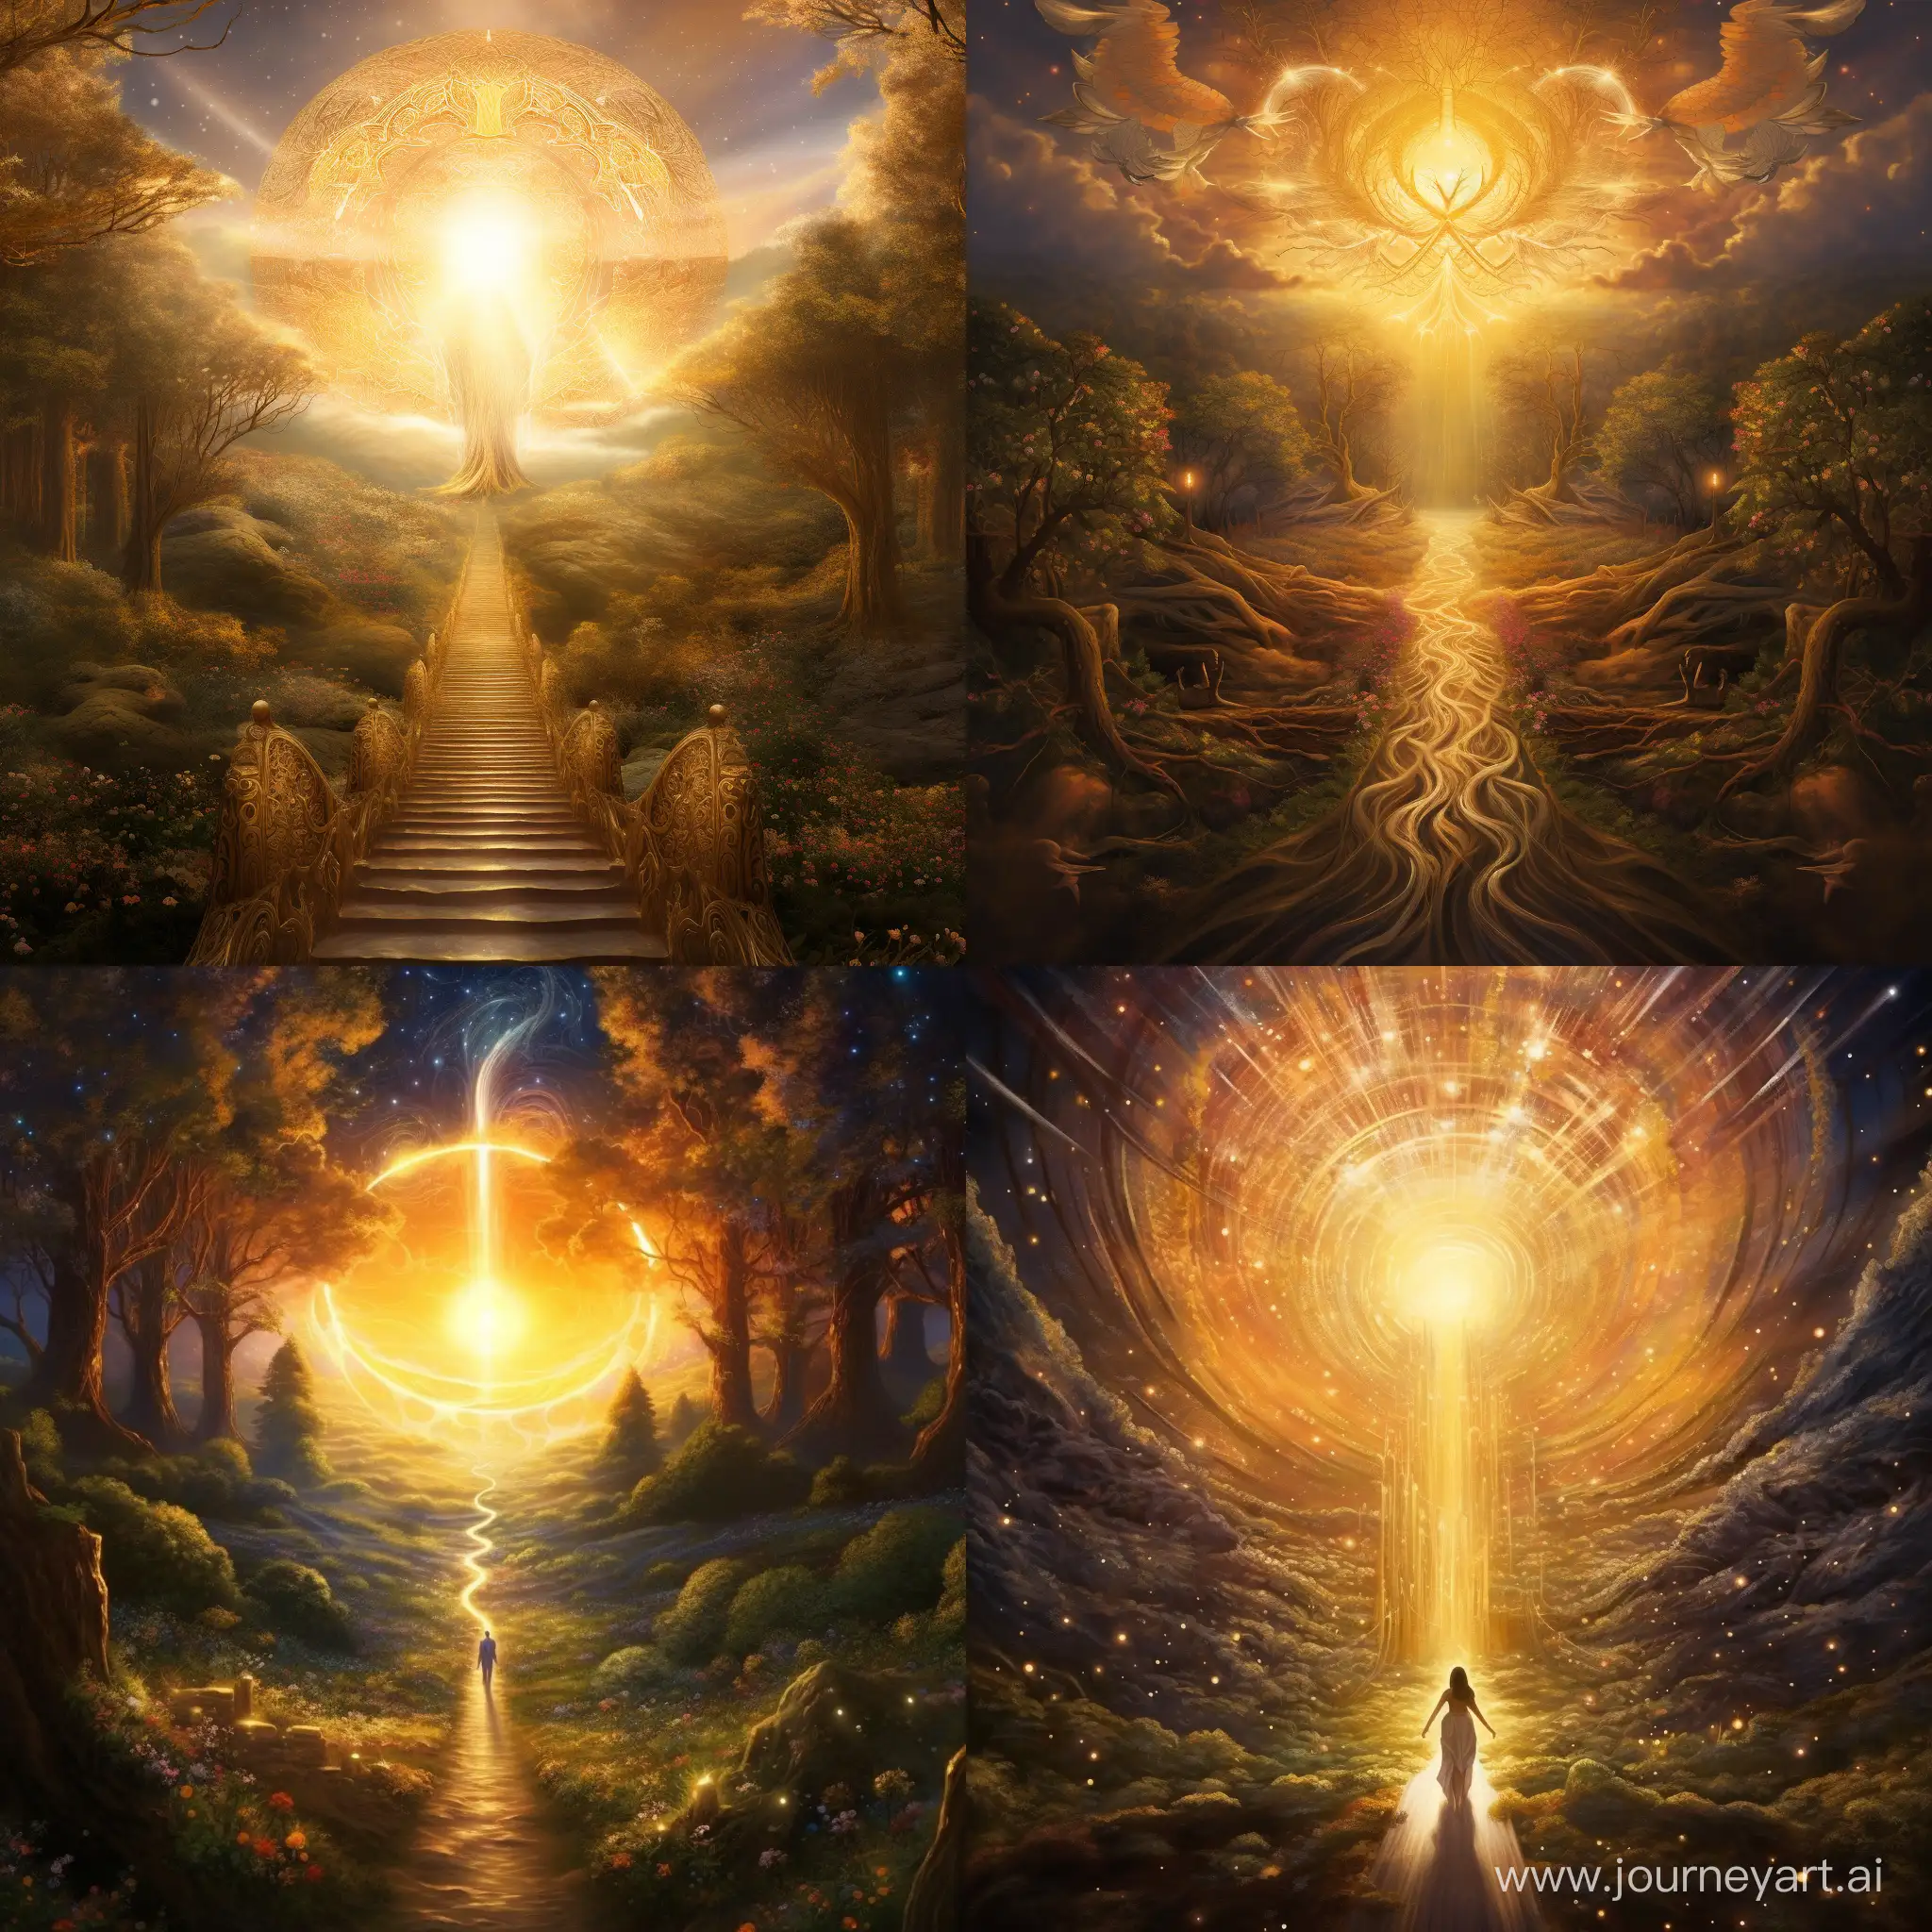 Radiant-Spiritual-Path-Embracing-Golden-Light-for-Spiritual-Growth-and-Union-with-the-Universe